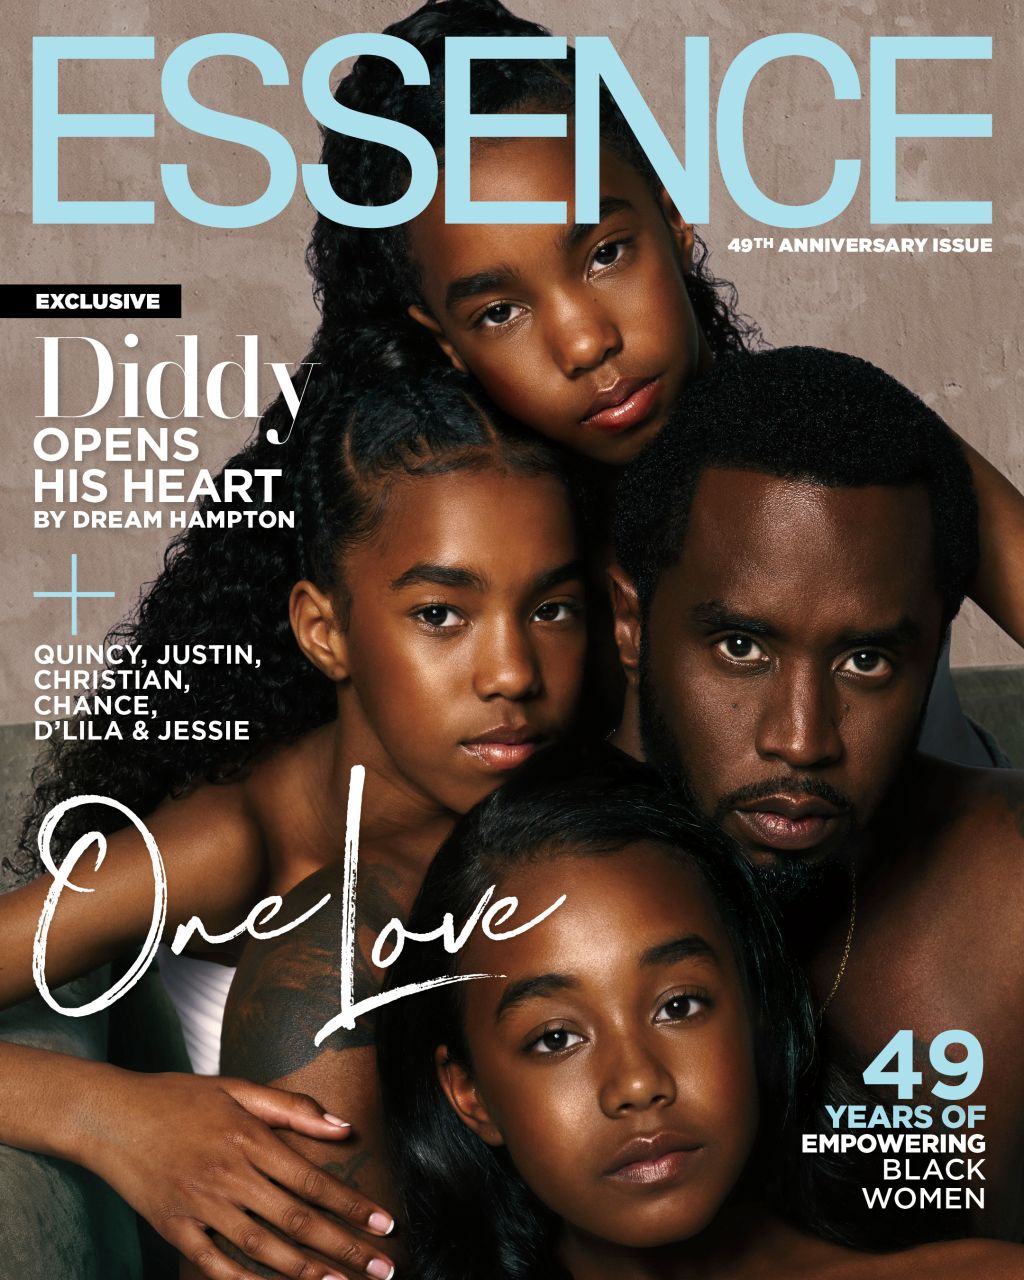 Diddy Essence Cover